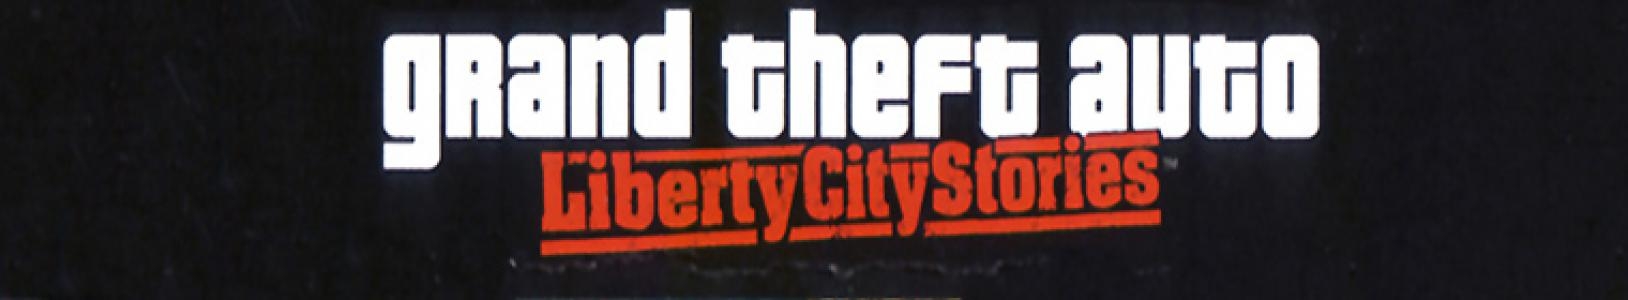 Grand Theft Auto: Liberty City Stories banner